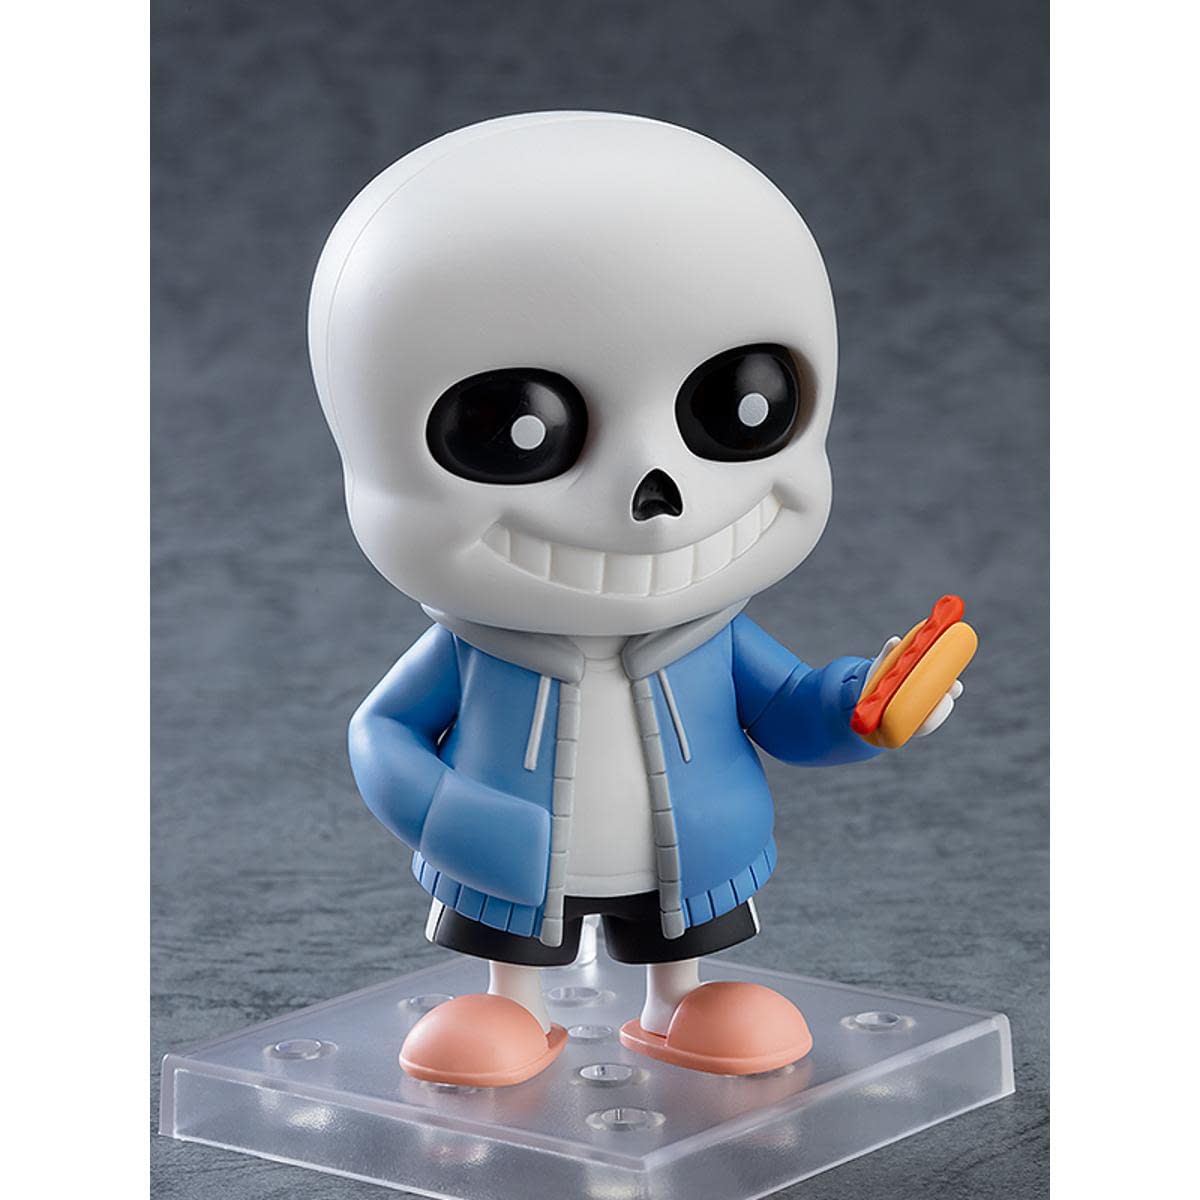 Undertale Sans and Papyrus Come to Life with Good Smile Company